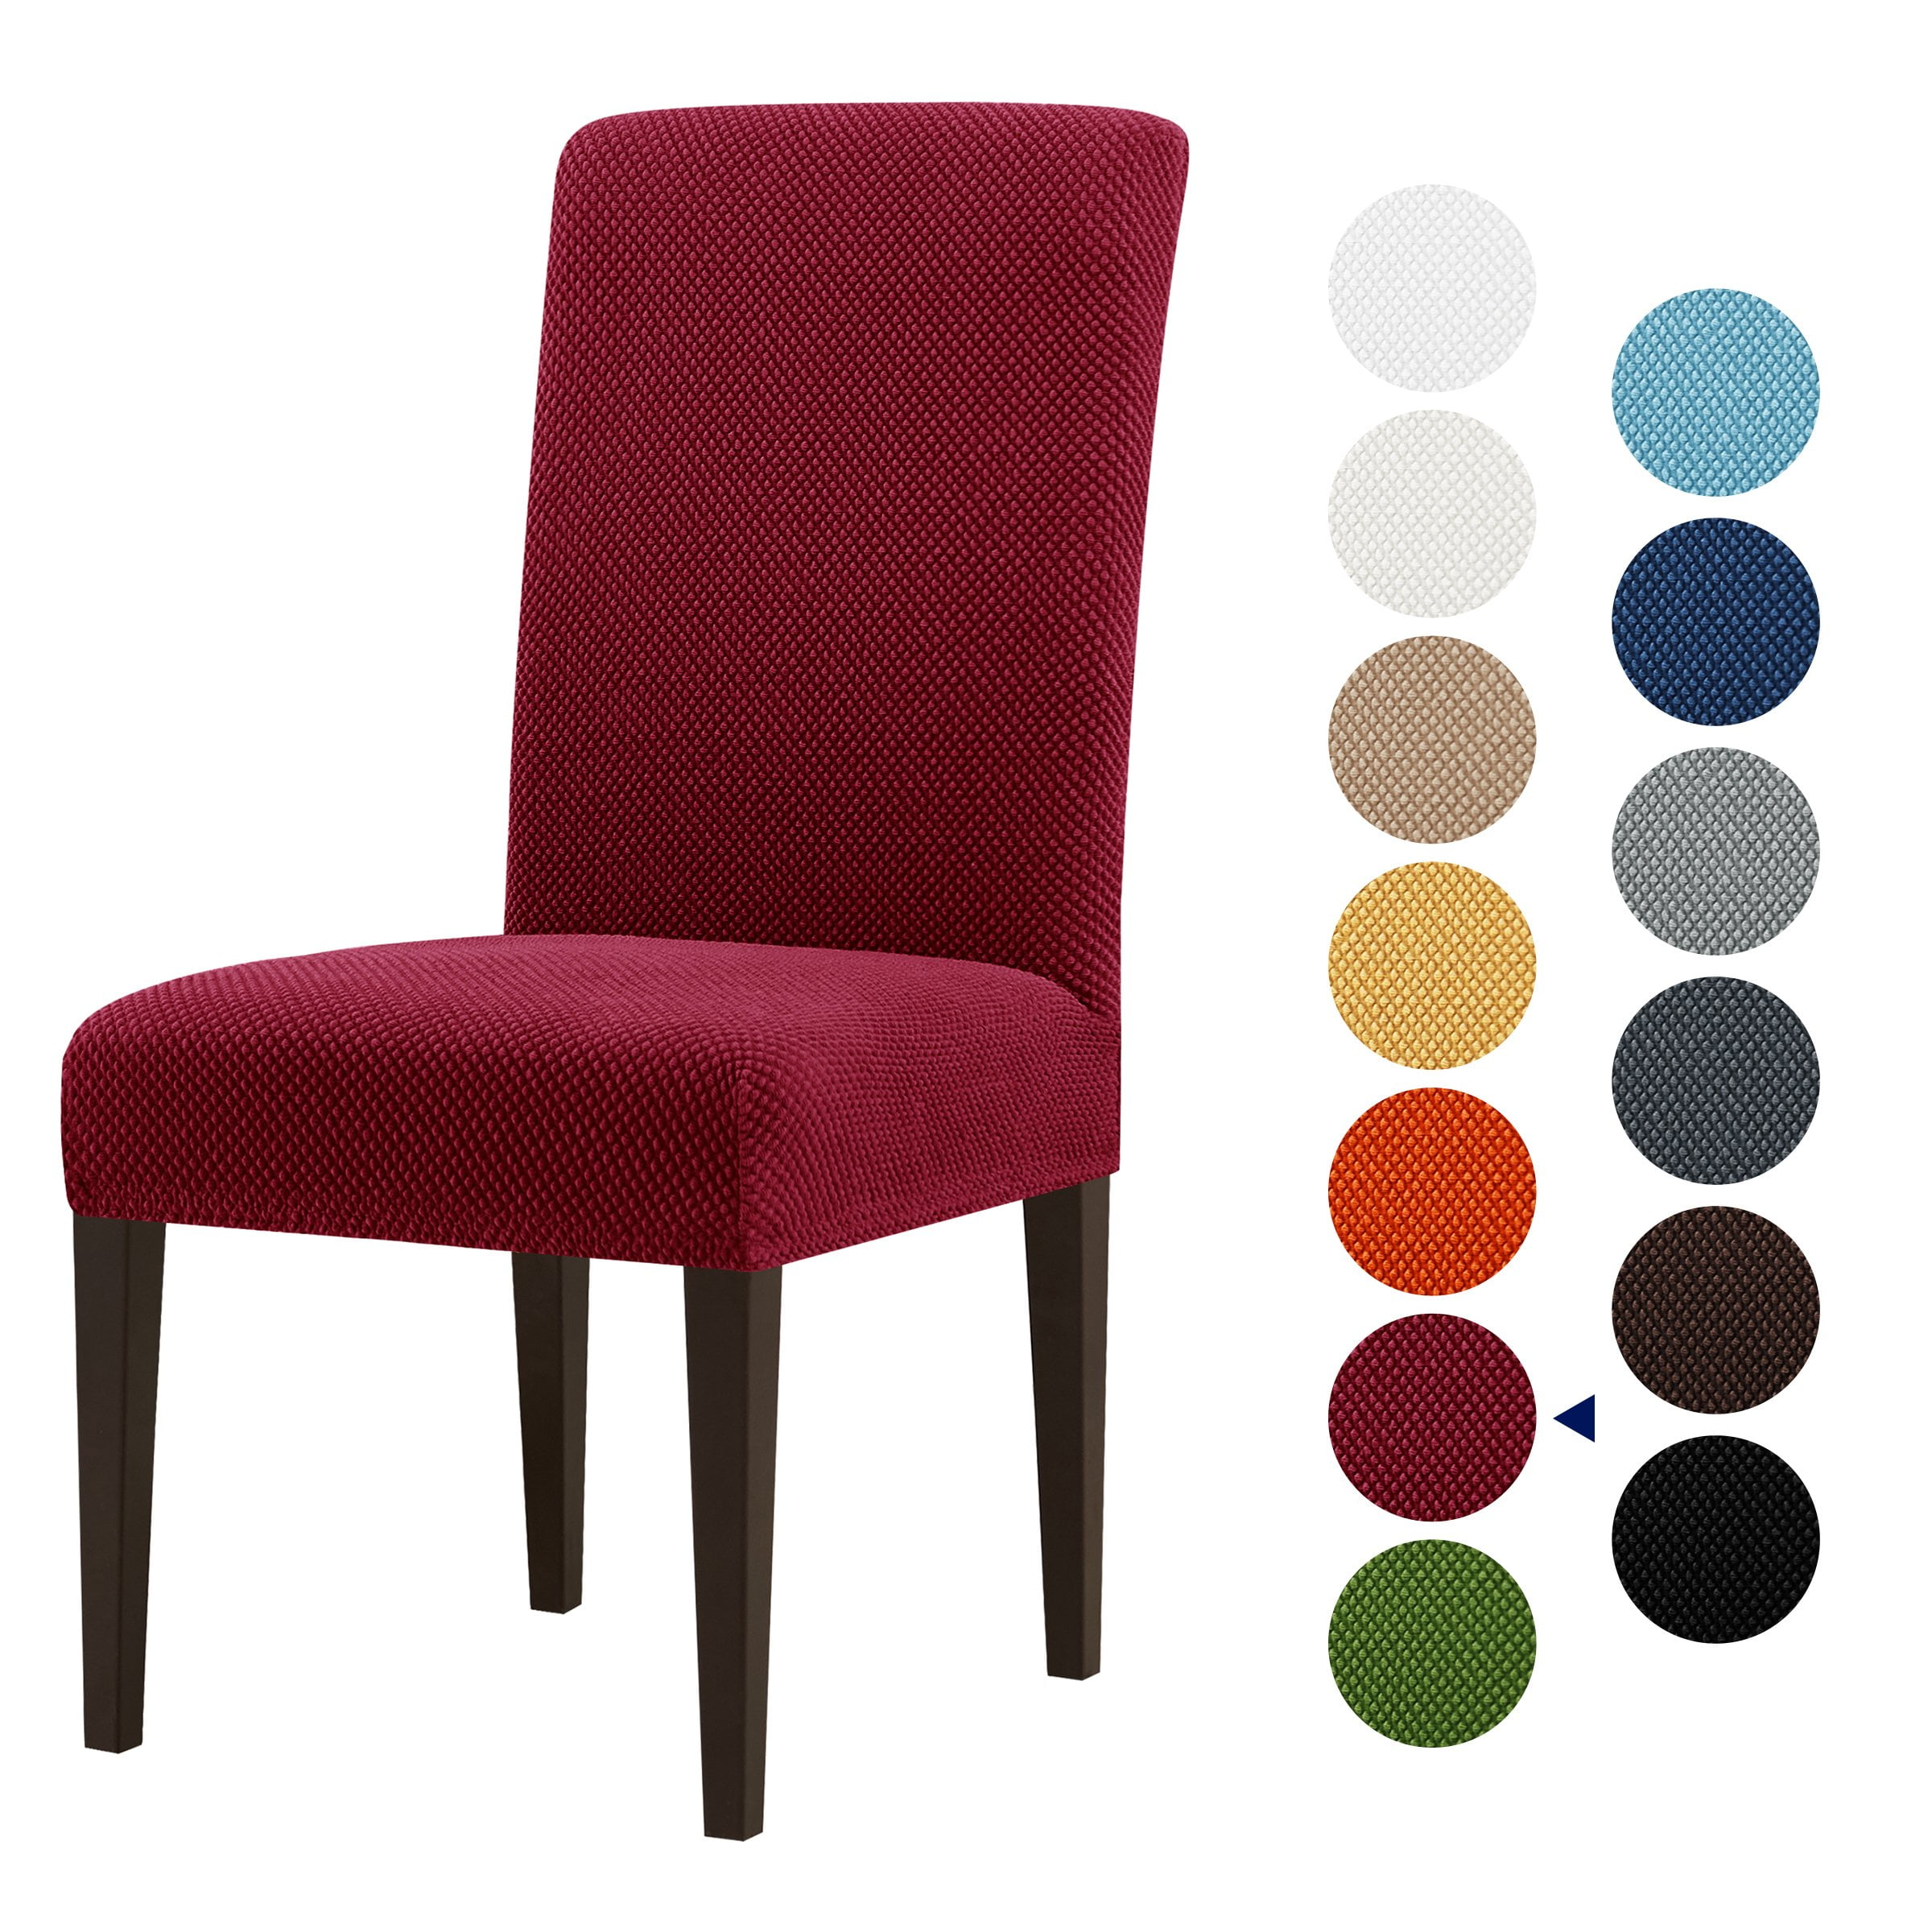 EZ Chair Cover Red Wine Burgandy 2pk Dining Room Stool Family Chairs Made in USA 